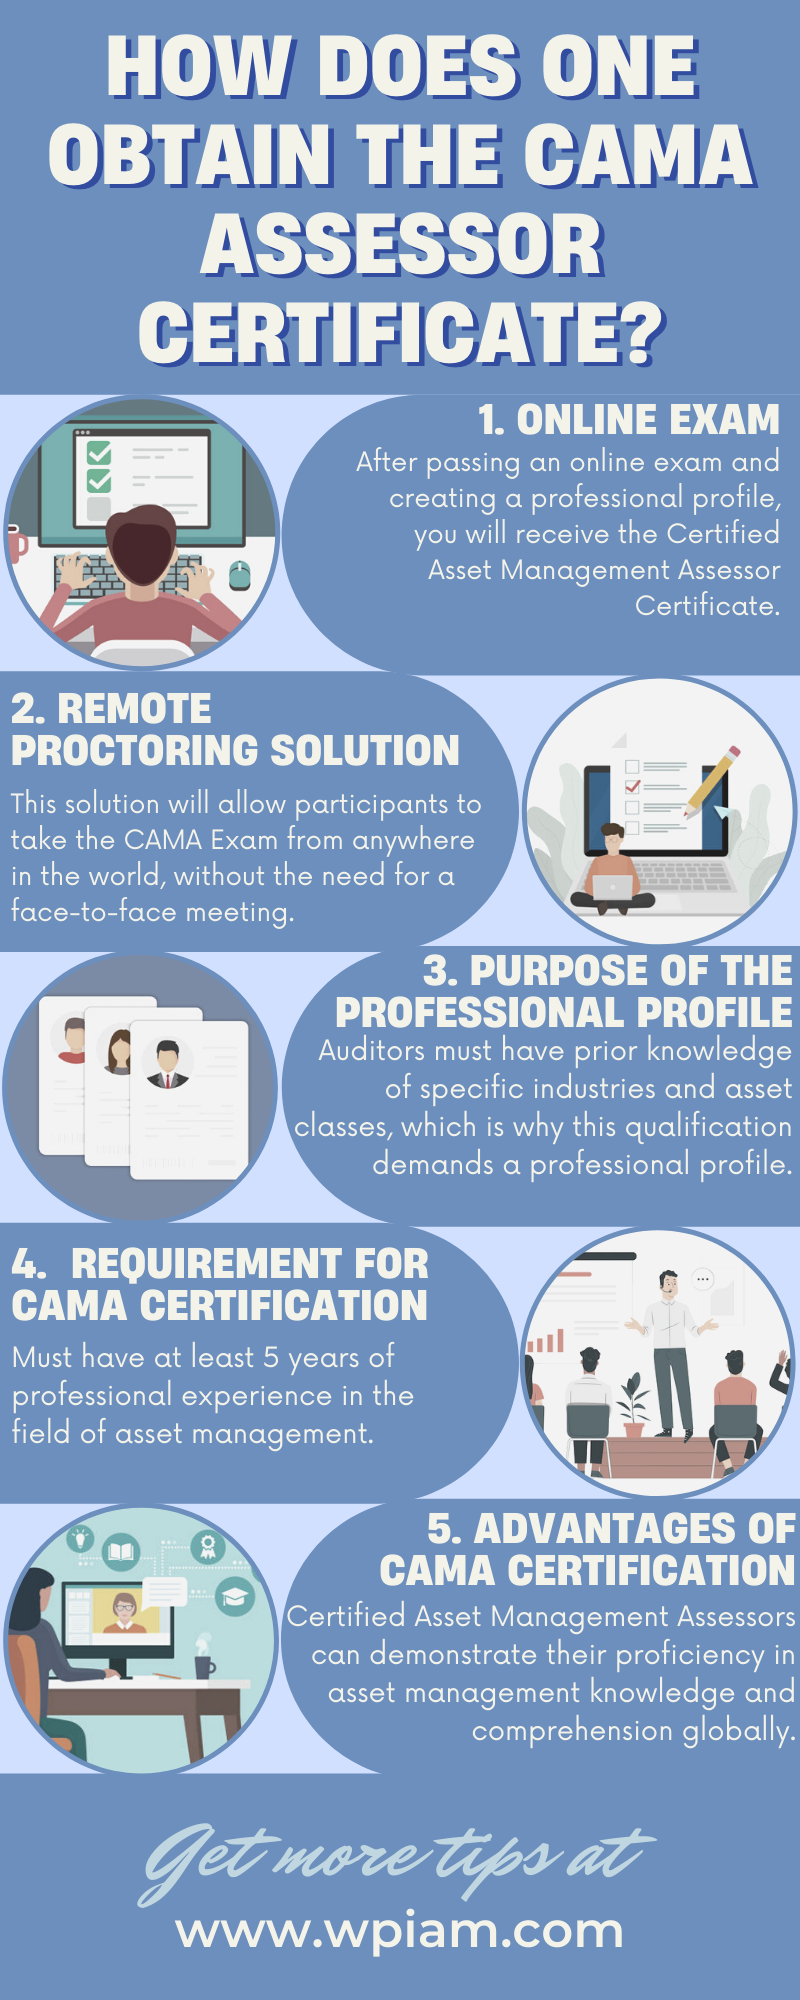 HOW DOES ONE OBTAIN THE CAMA ASSESSOR CERTIFICATE?